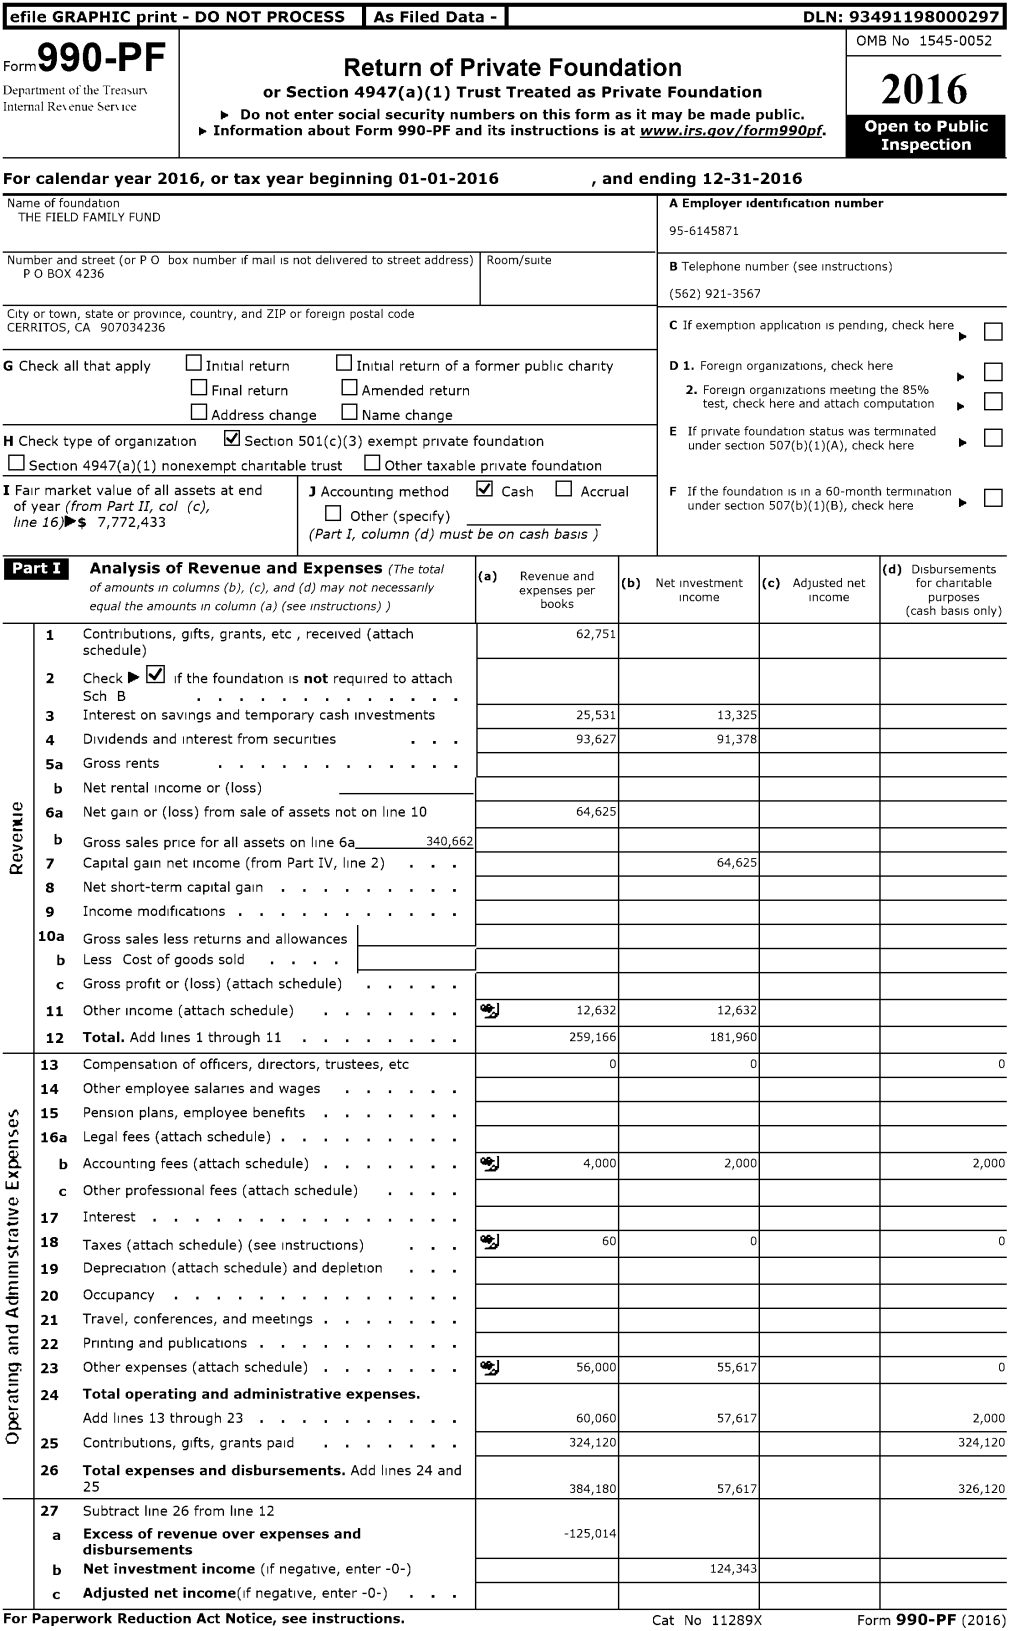 2016 Internal Res Enue Sem Ice ► Do Not Enter Social Security Numbers on This Form As It May Be Made Public